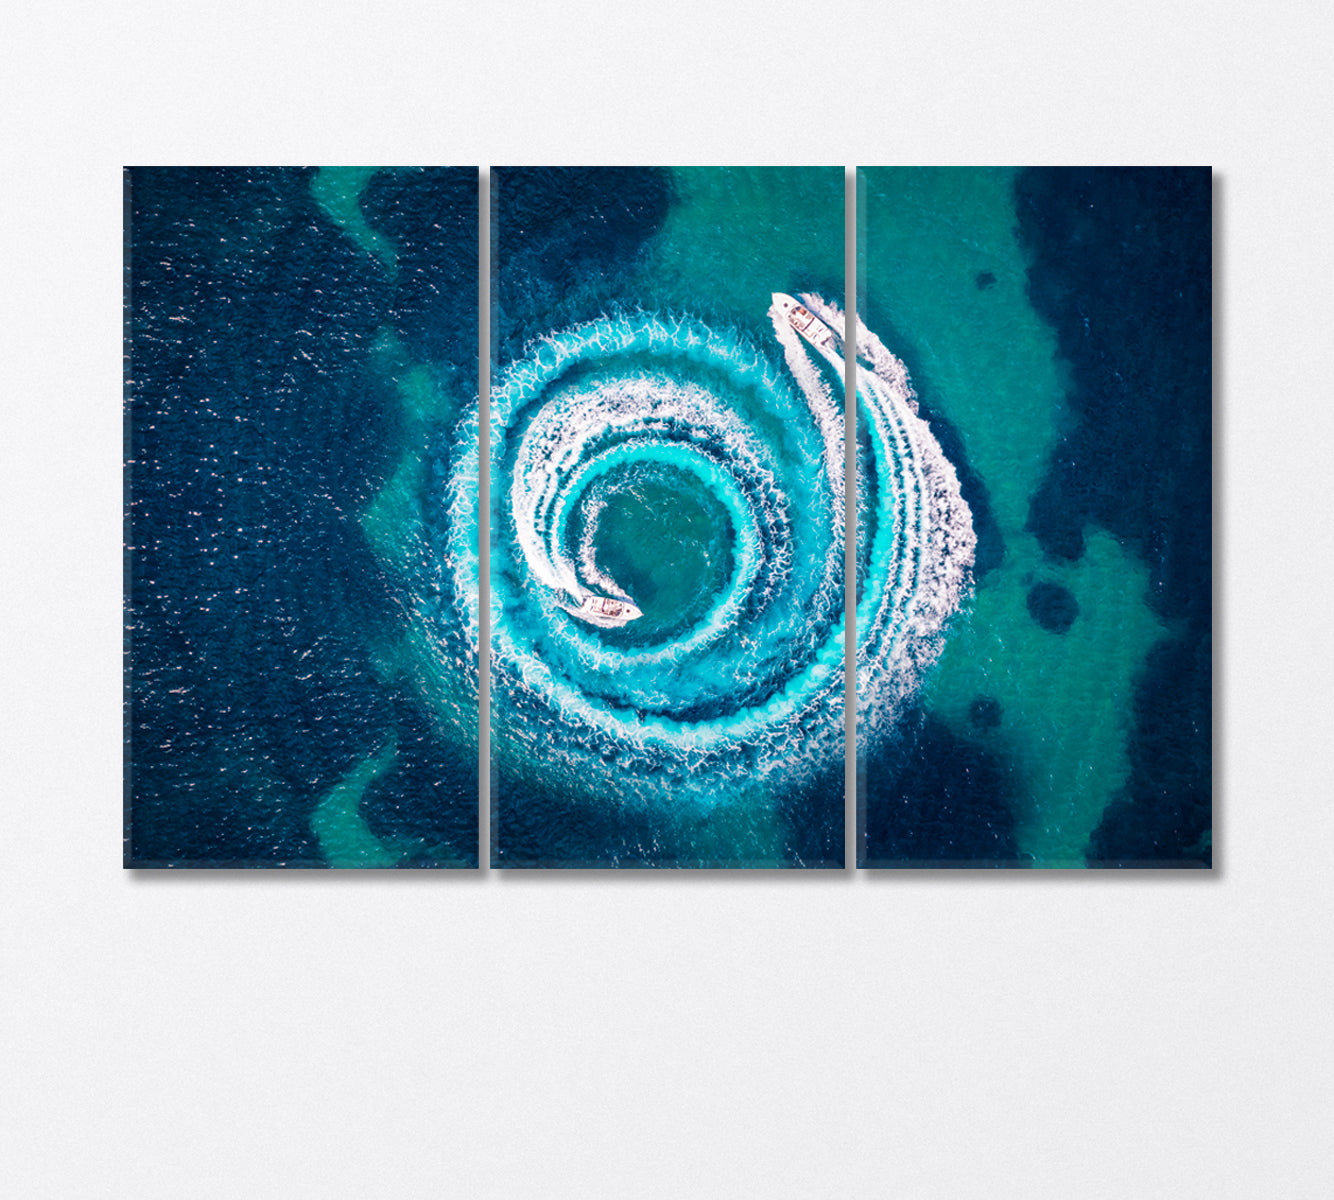 Two Motor Boats on the Turquoise Sea Canvas Print-Canvas Print-CetArt-3 Panels-36x24 inches-CetArt